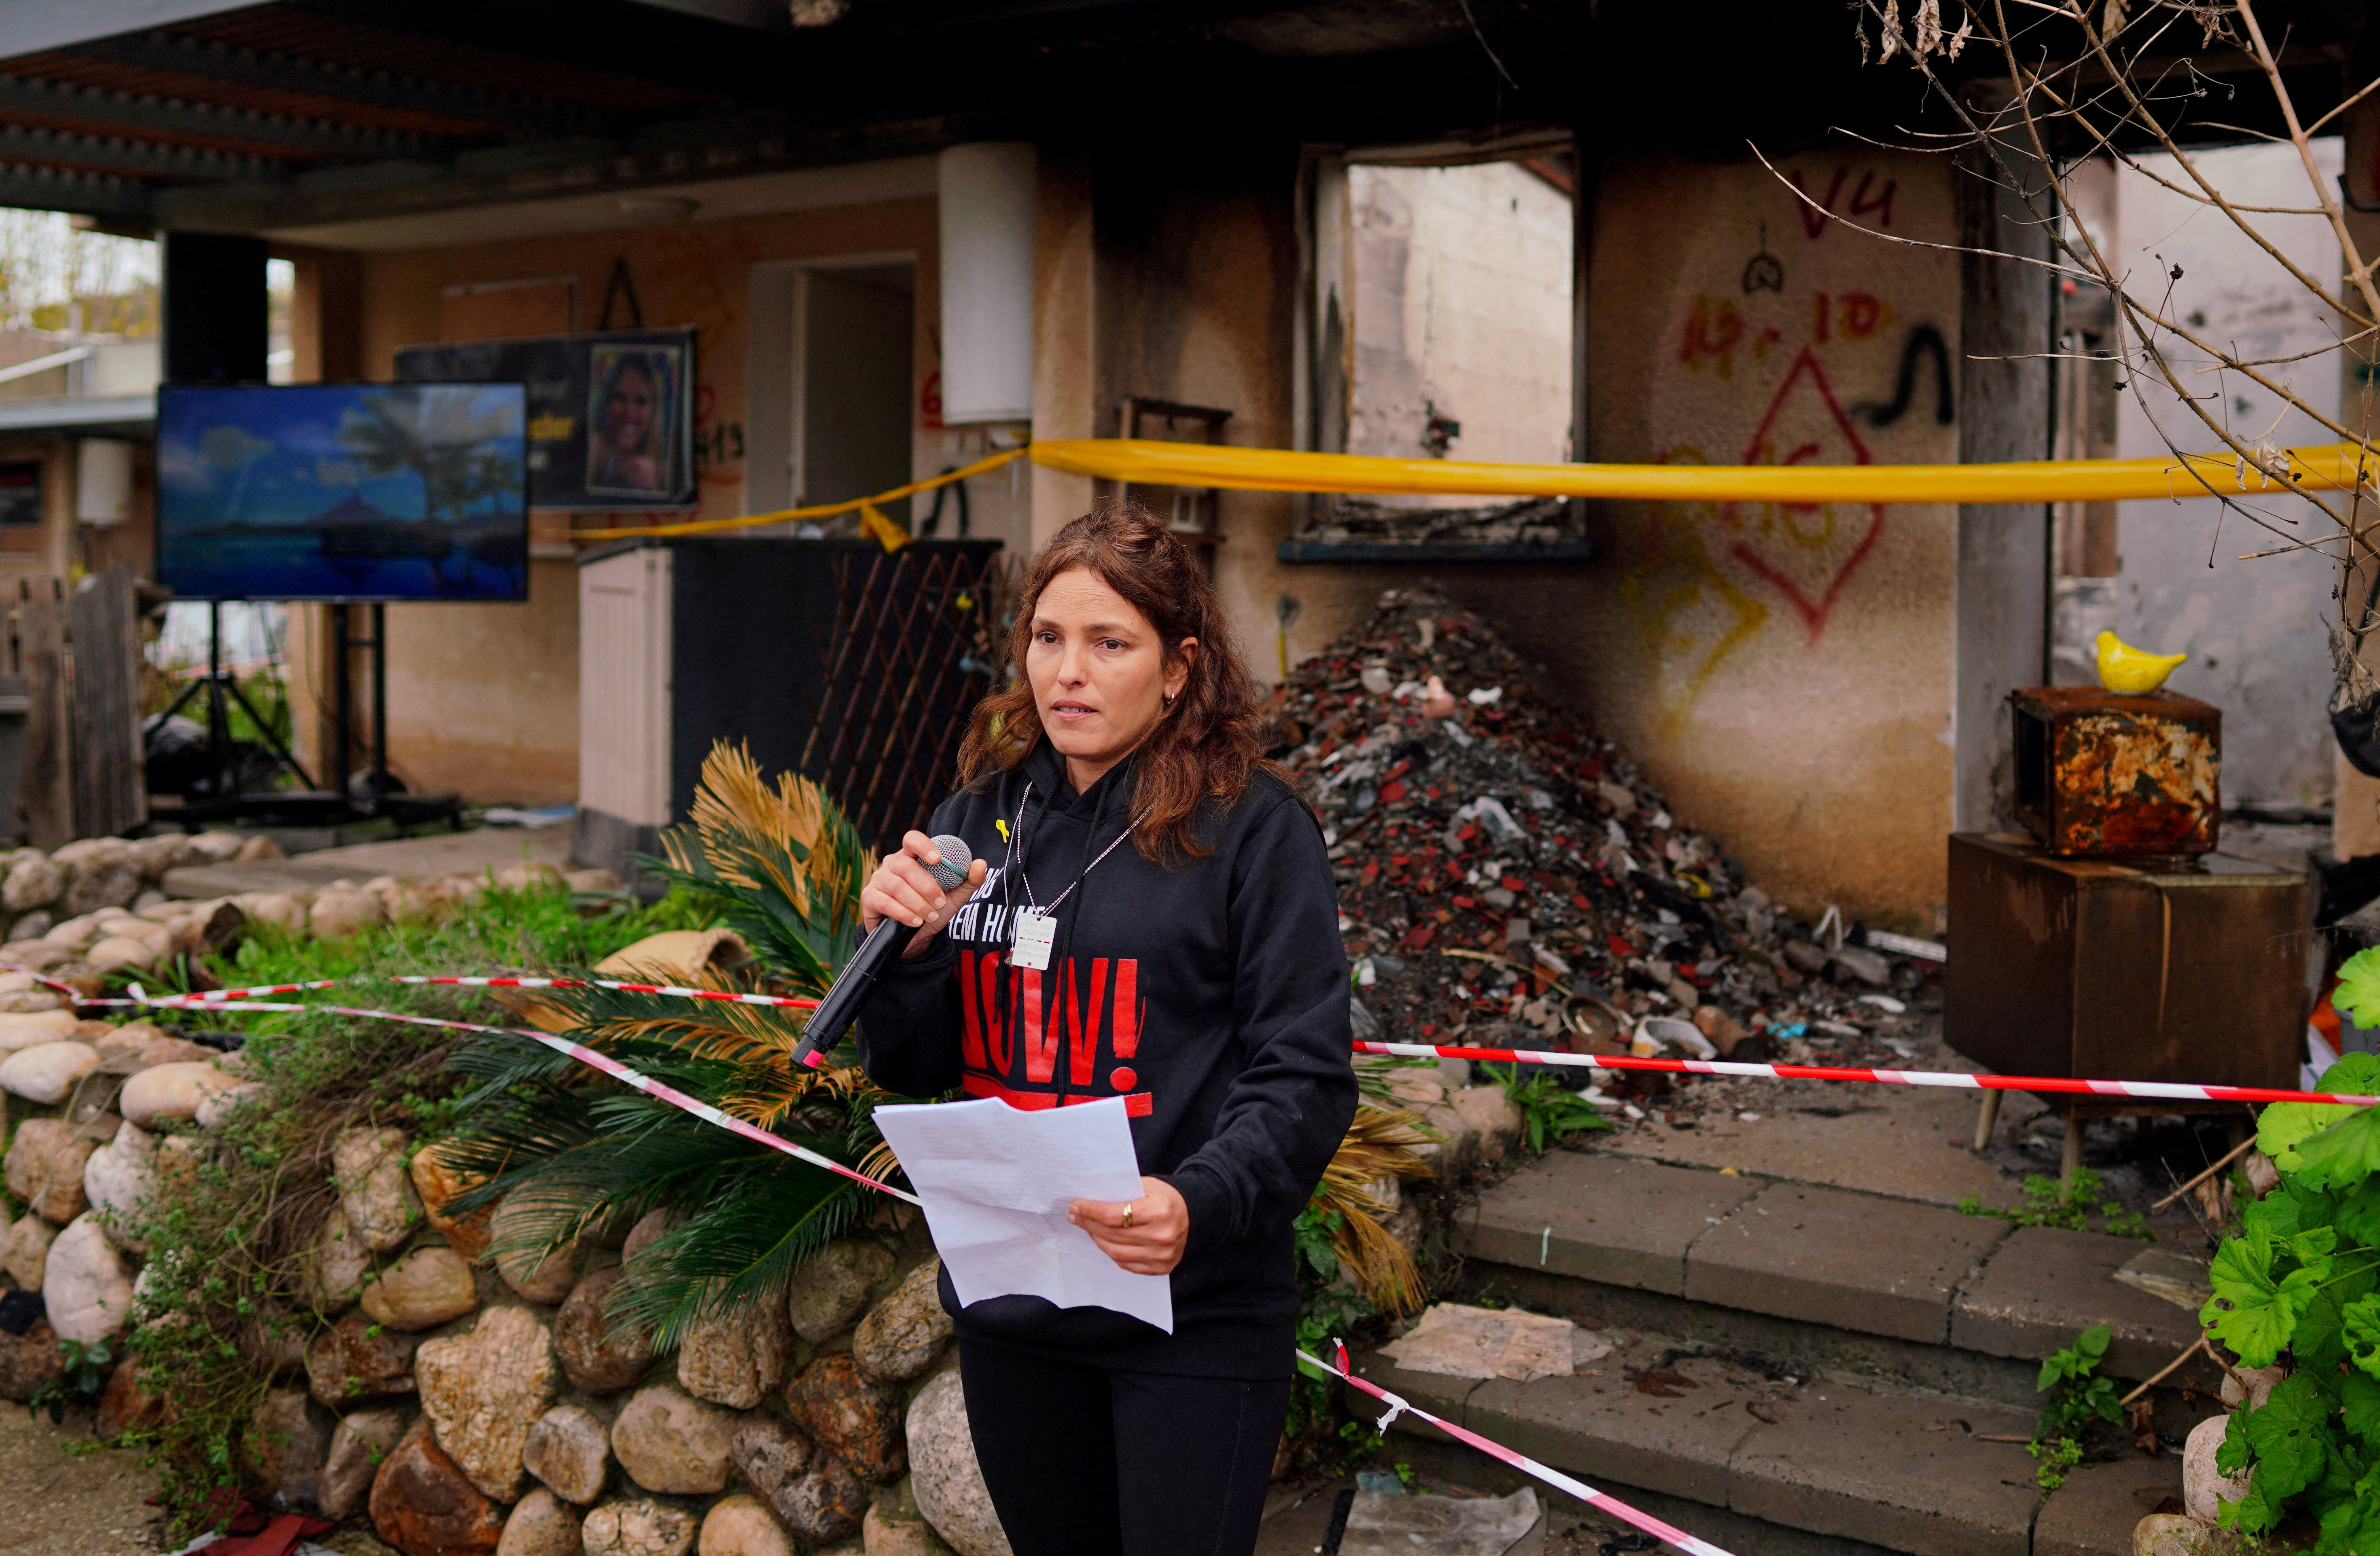 Released hostage Amit Soussana talks to the press in front of her destroyed home at the Kibbutz Kfar Aza